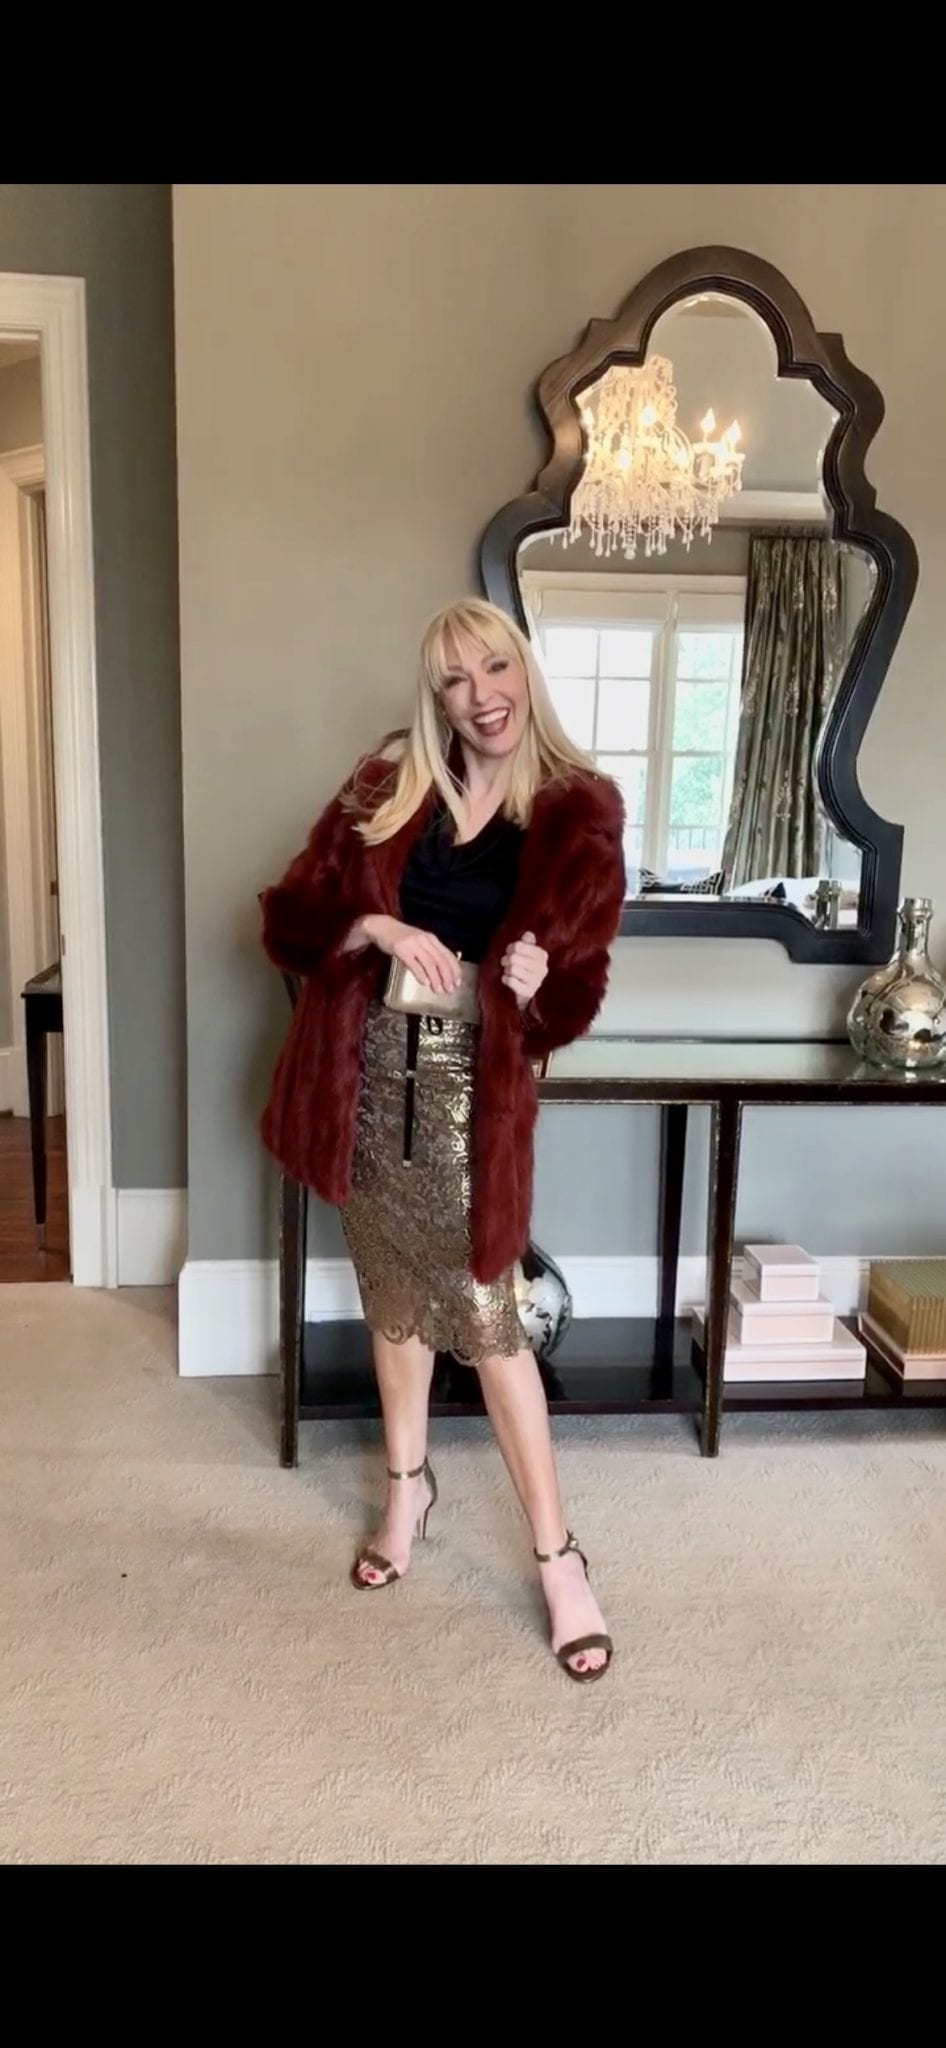 Looking for outfits to wear to holiday parties this year? I got you! Here are three outfits from White House Black Market - everything from a Corporate Work party, to Girls Night out or School Holiday Party to a Glamorous New Years Eve Event! Watch my try on video here!